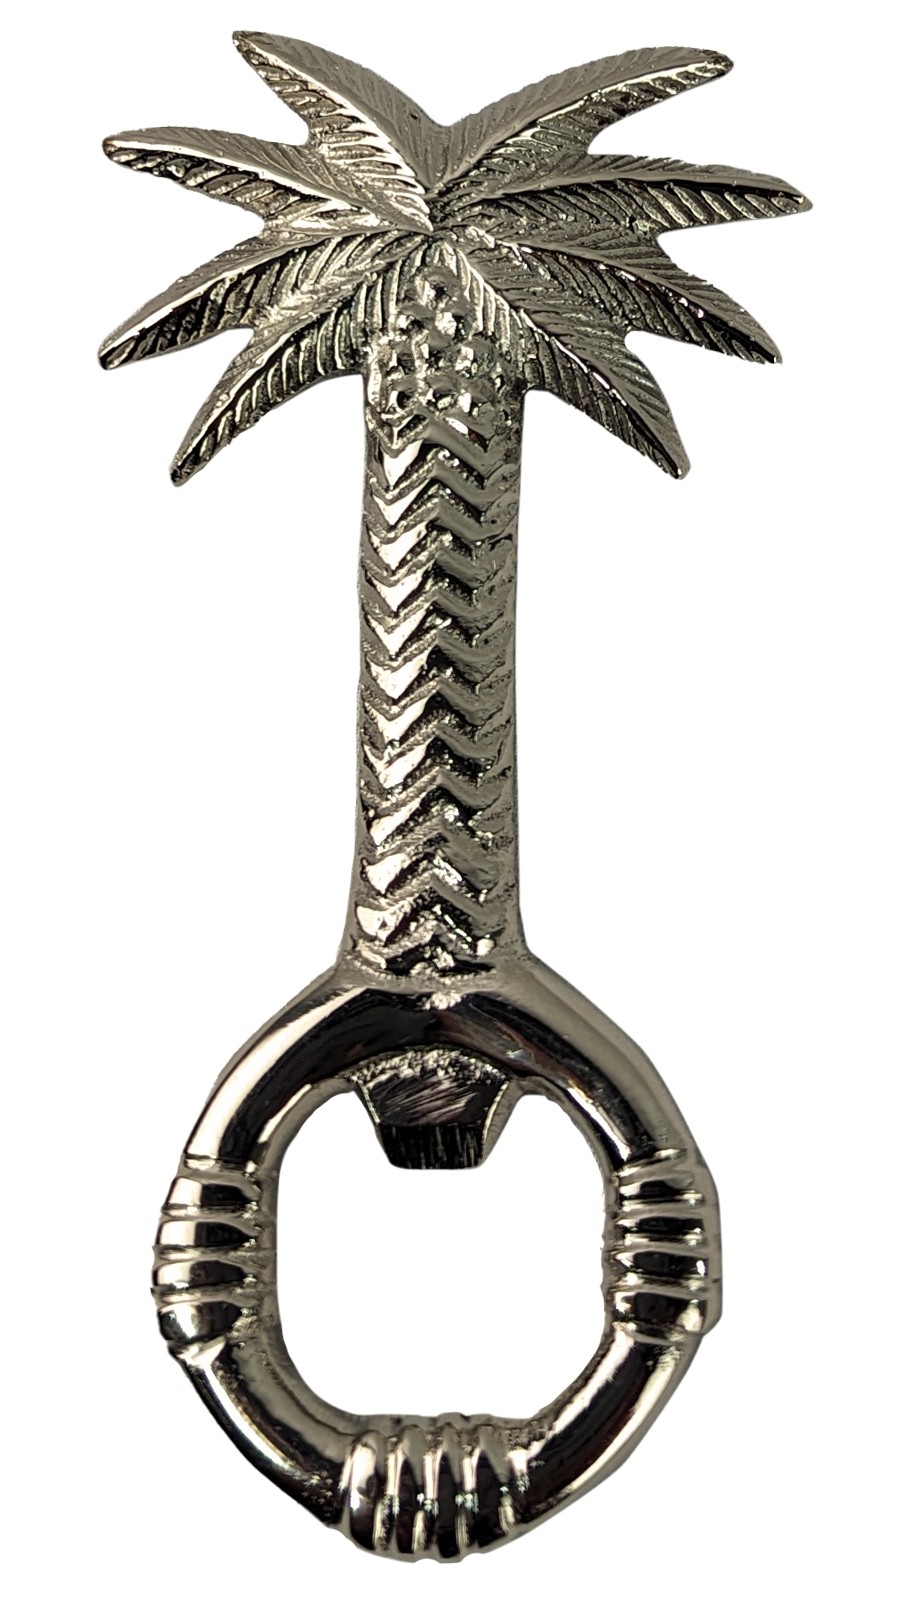 Palm Tree Bottle Opener Nickle Plated - 12cm